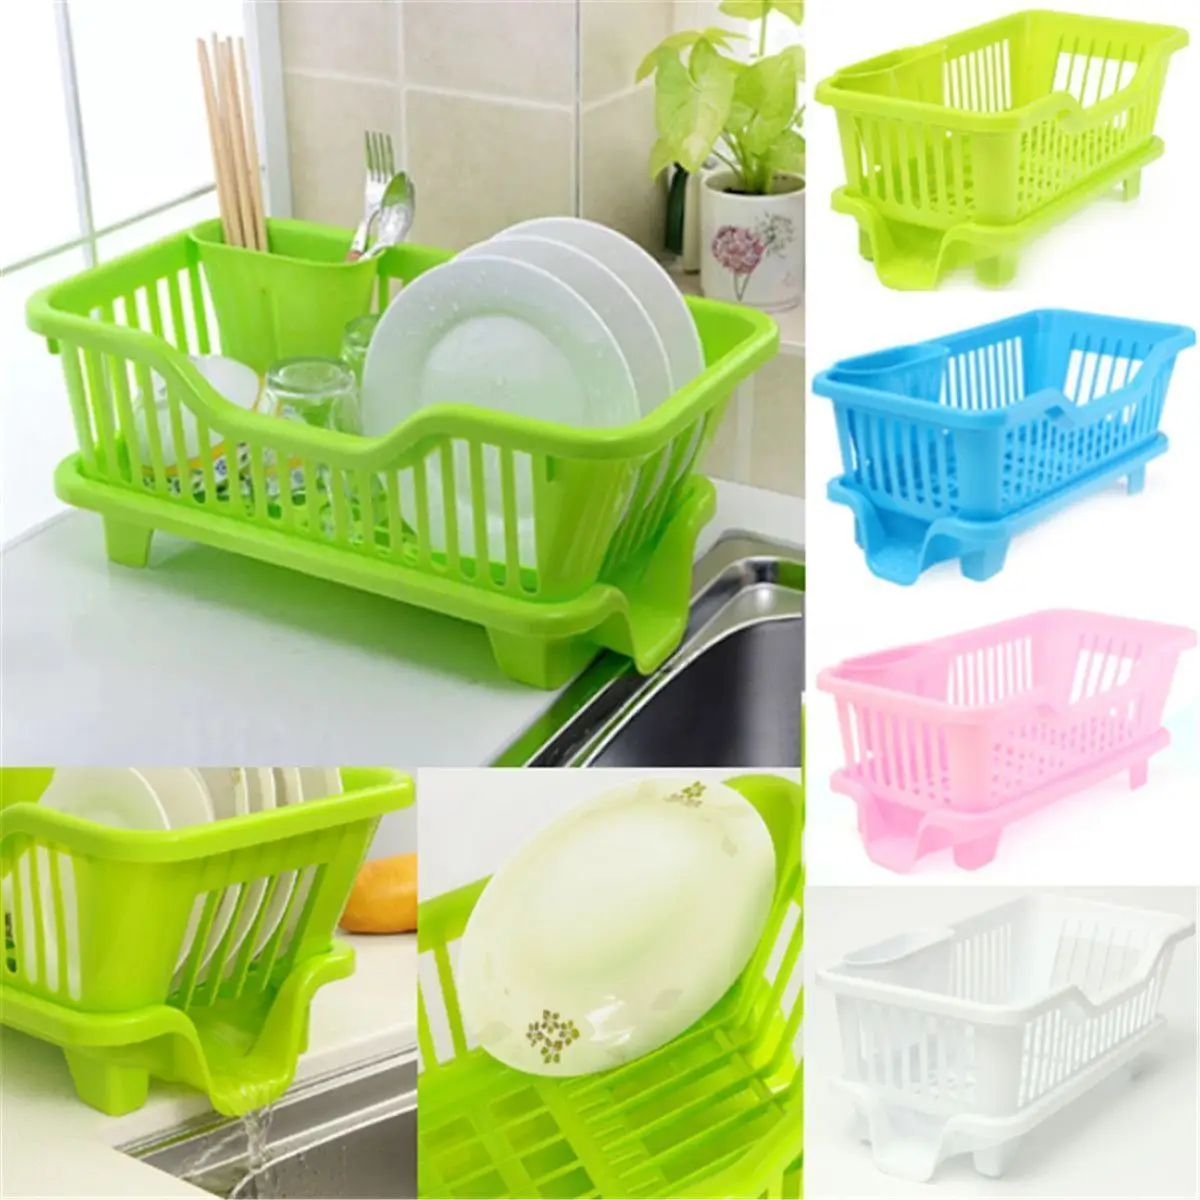 Dish Drainer Plates Cups Cutlery Holder Kitchen Sink Drying Rack Tray LJL 